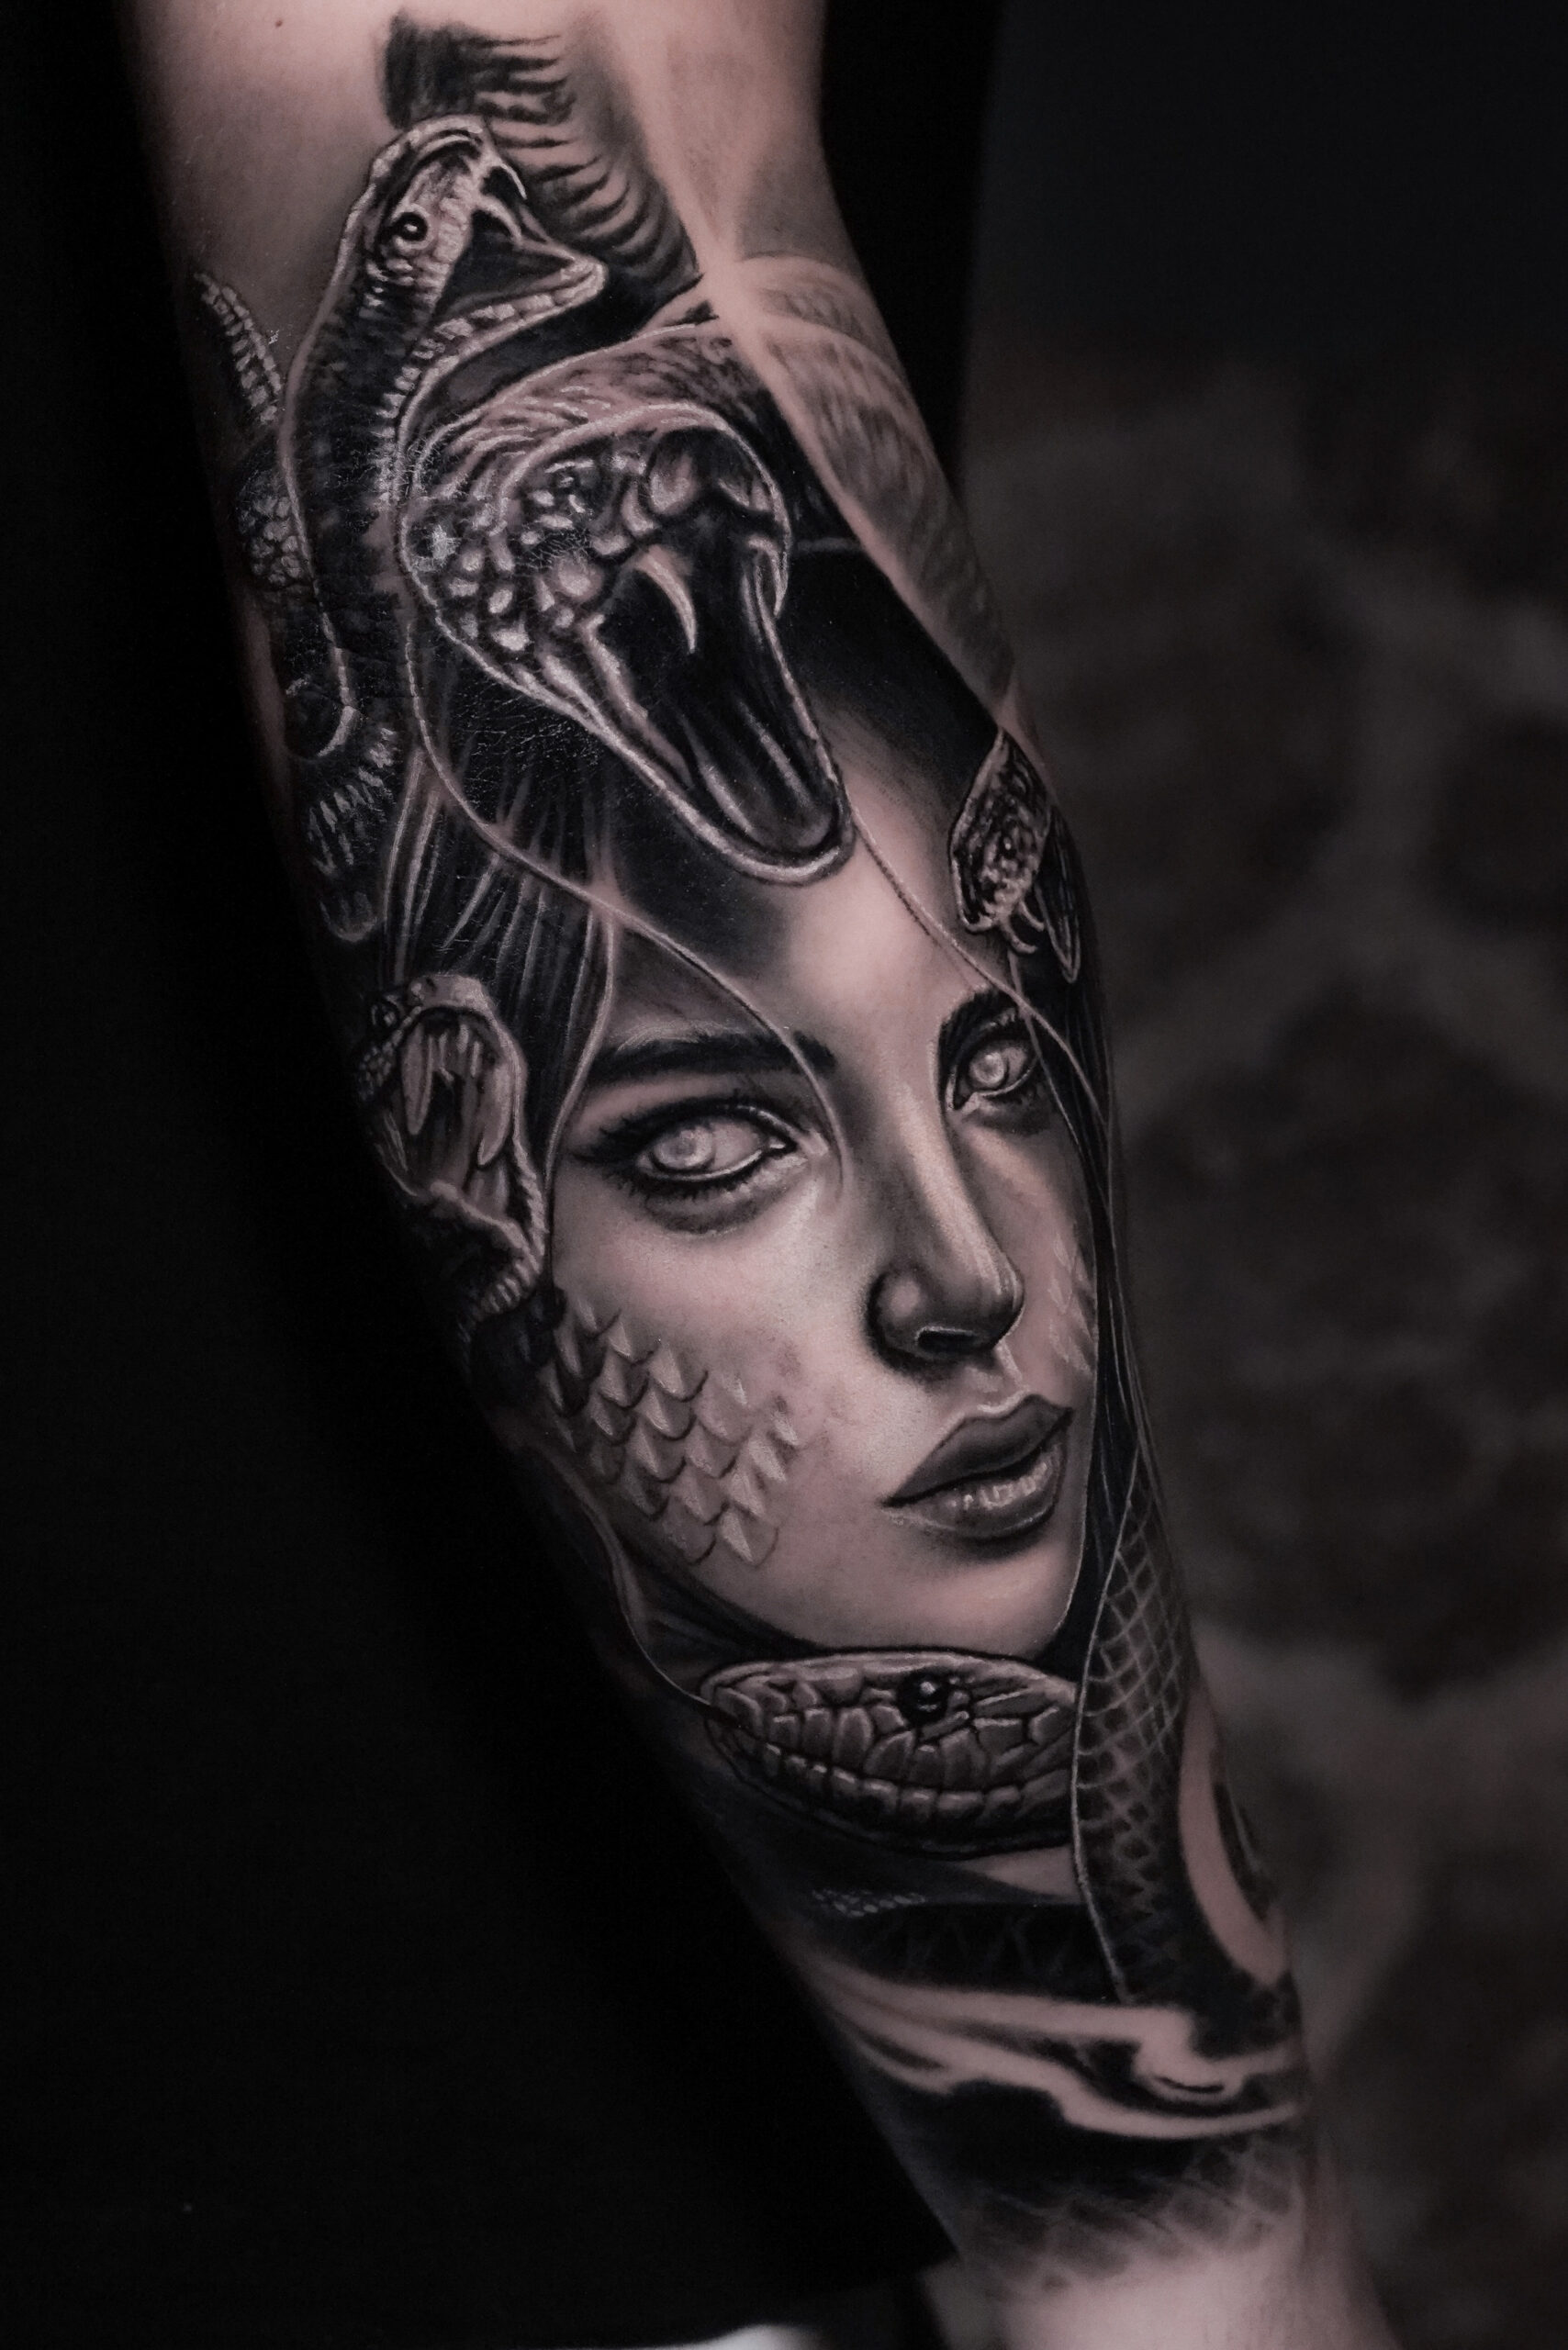 Medusa Tattoo: Meaning And What It Represents